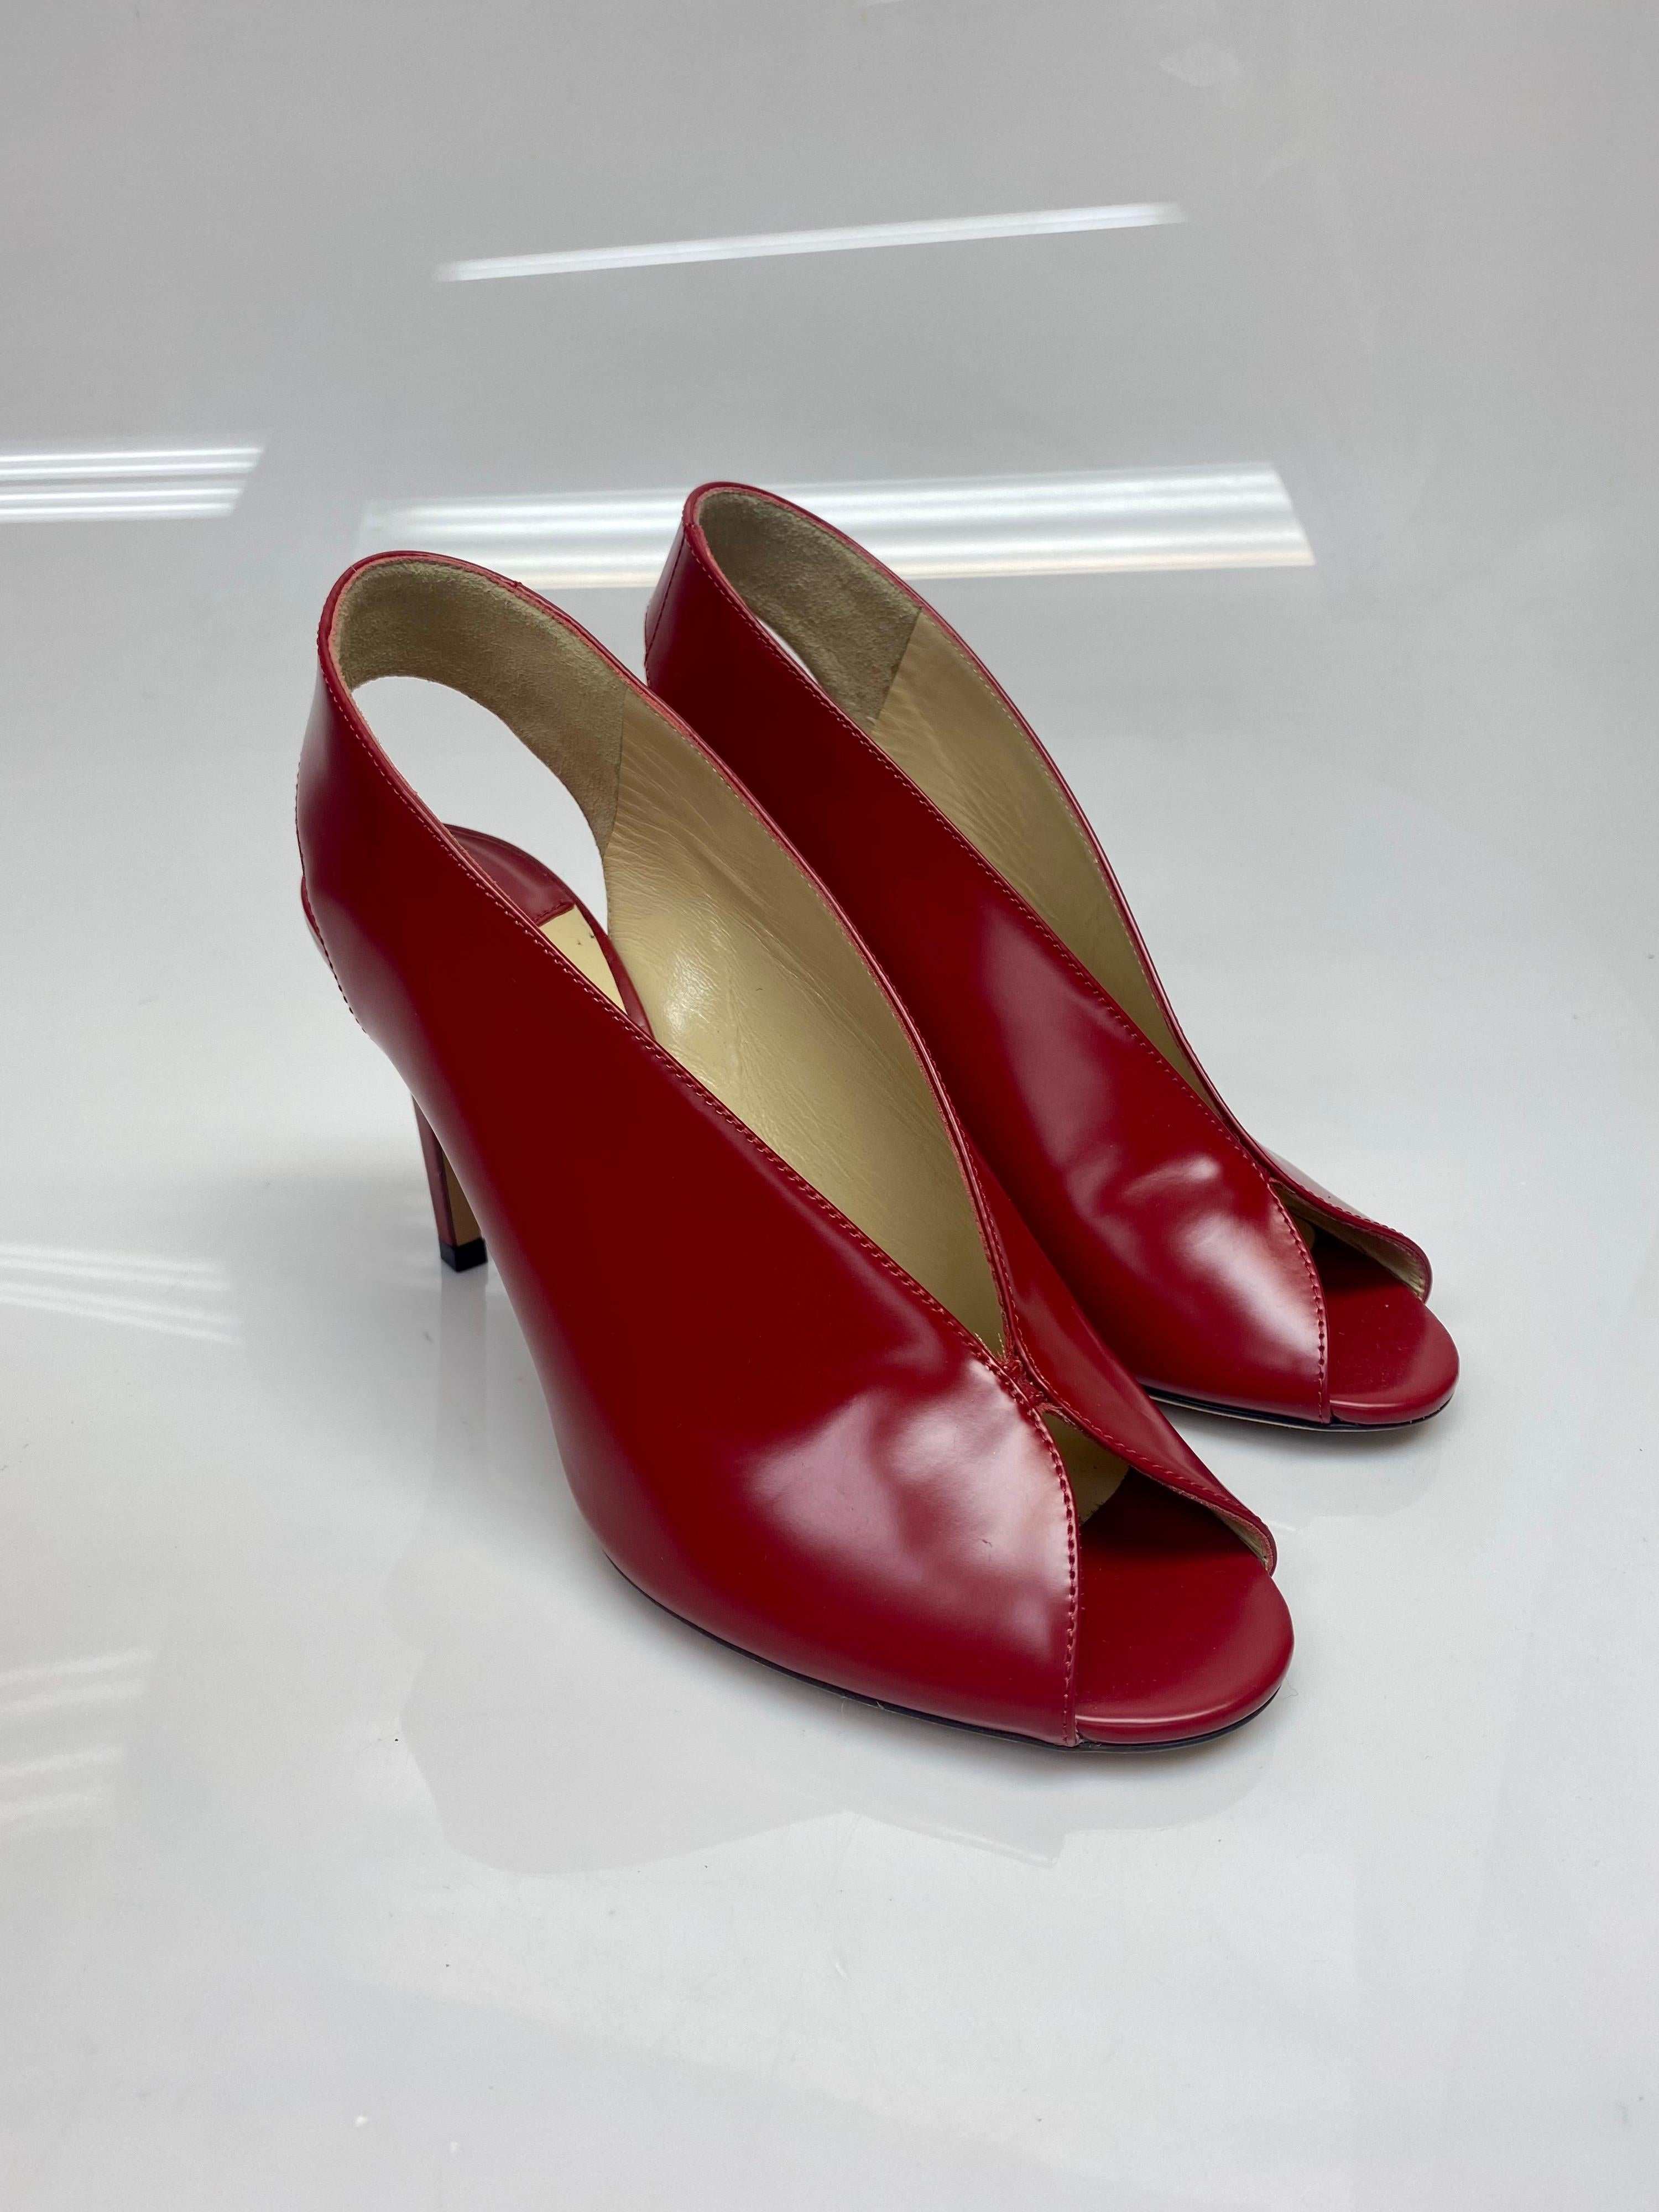 Jimmy Choo Red Leather Singback Heels - Size 37. Be a trendsetter by waltzing out in this exquisite Jimmy Choo pair. Crafted from patent leather, these red beauties feature peep toes and singback's for comfort. Slip them on over simple outfits and